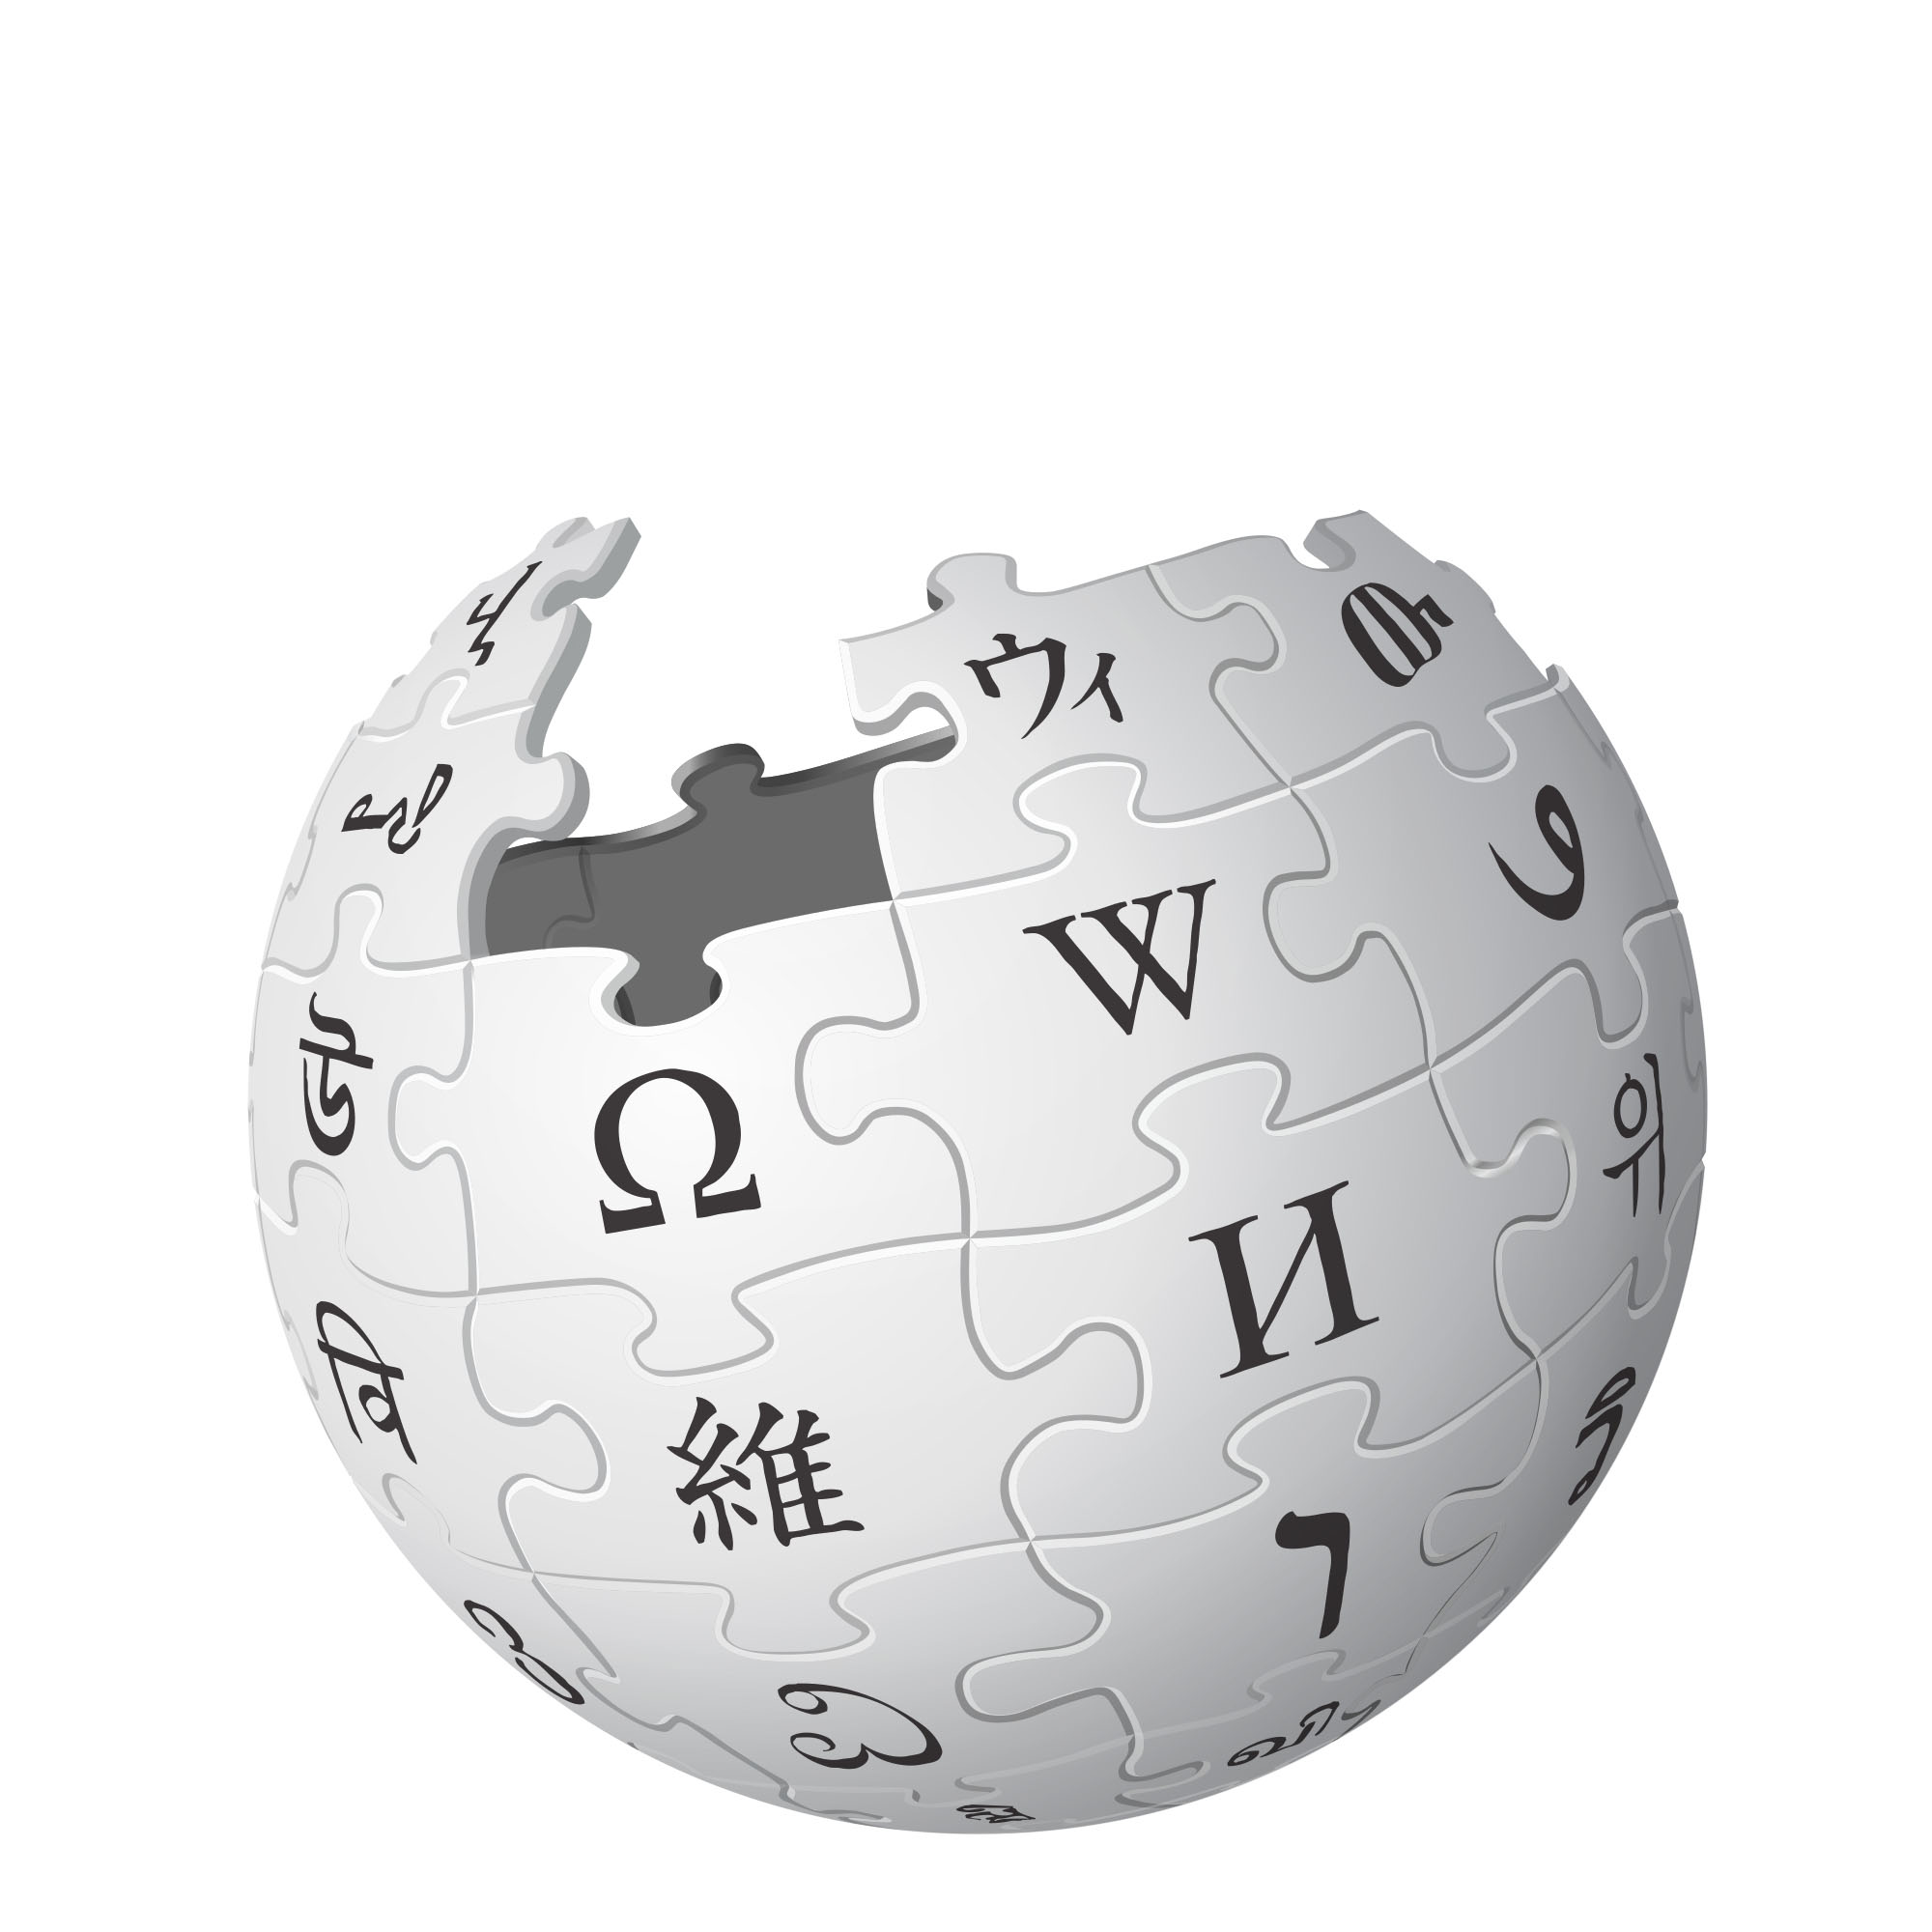 A picture of the wikipedia globe.